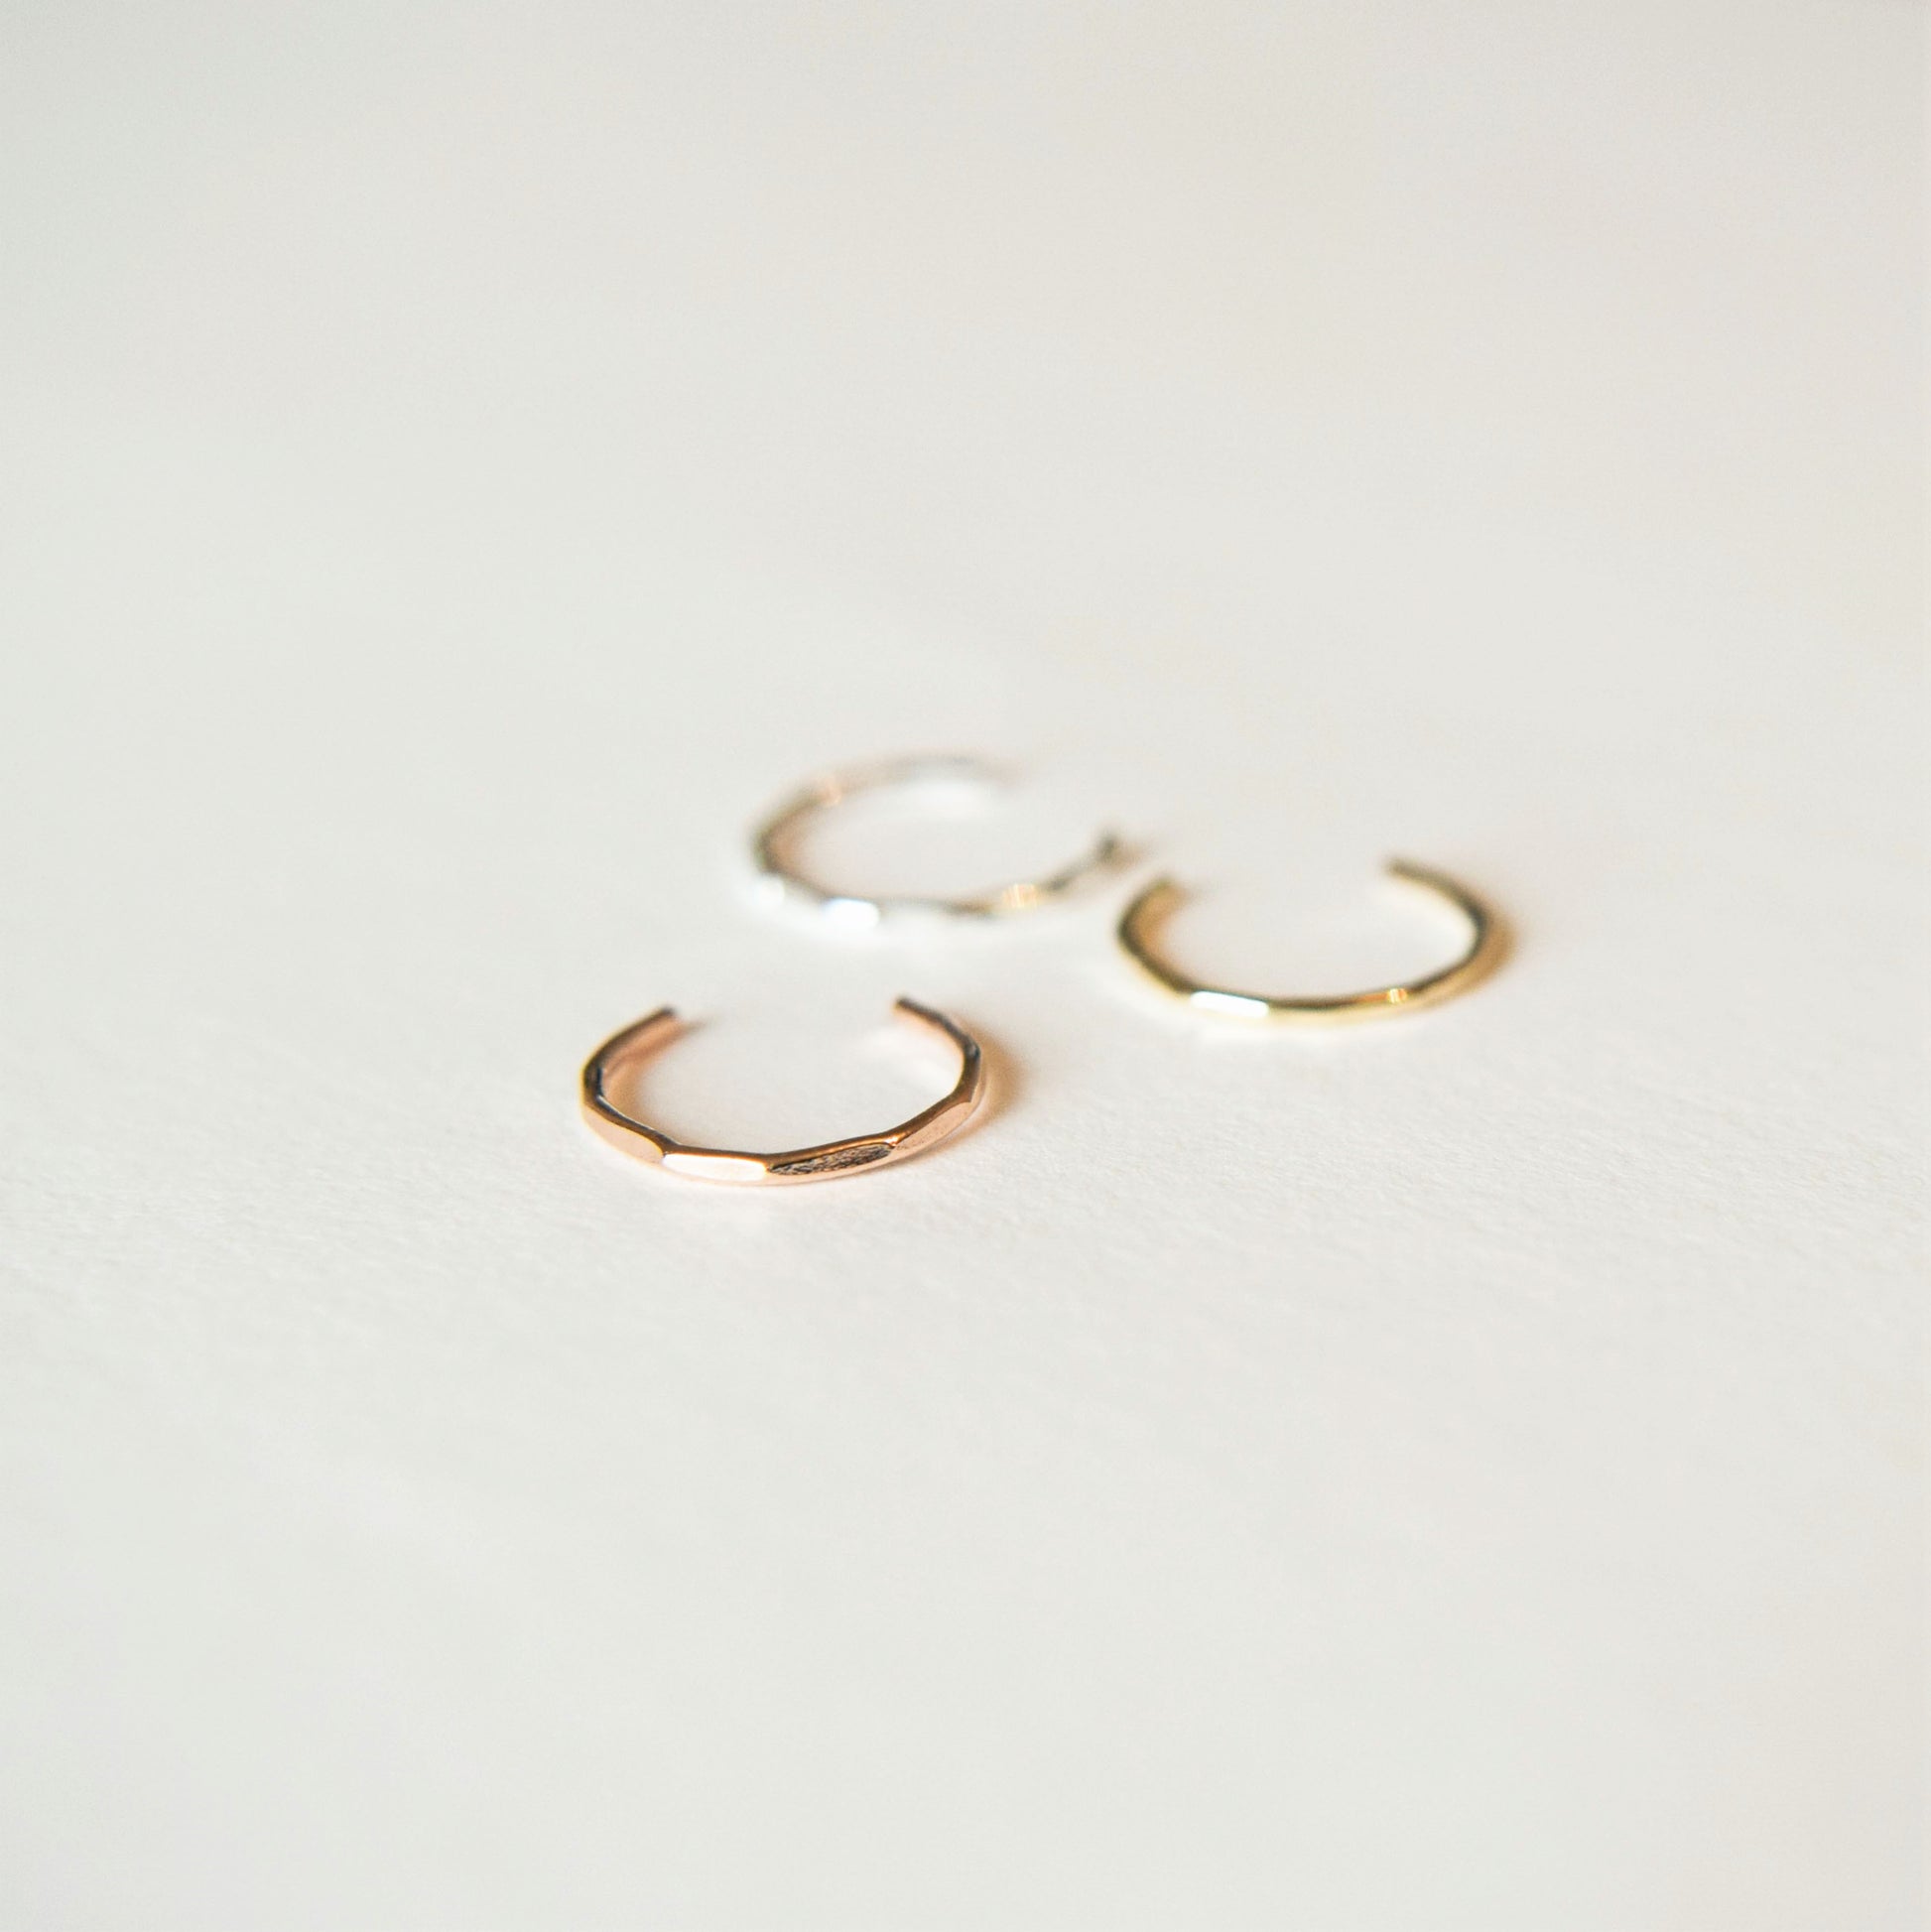 three conch cuffs; silver, gold and rose gold laying on white background